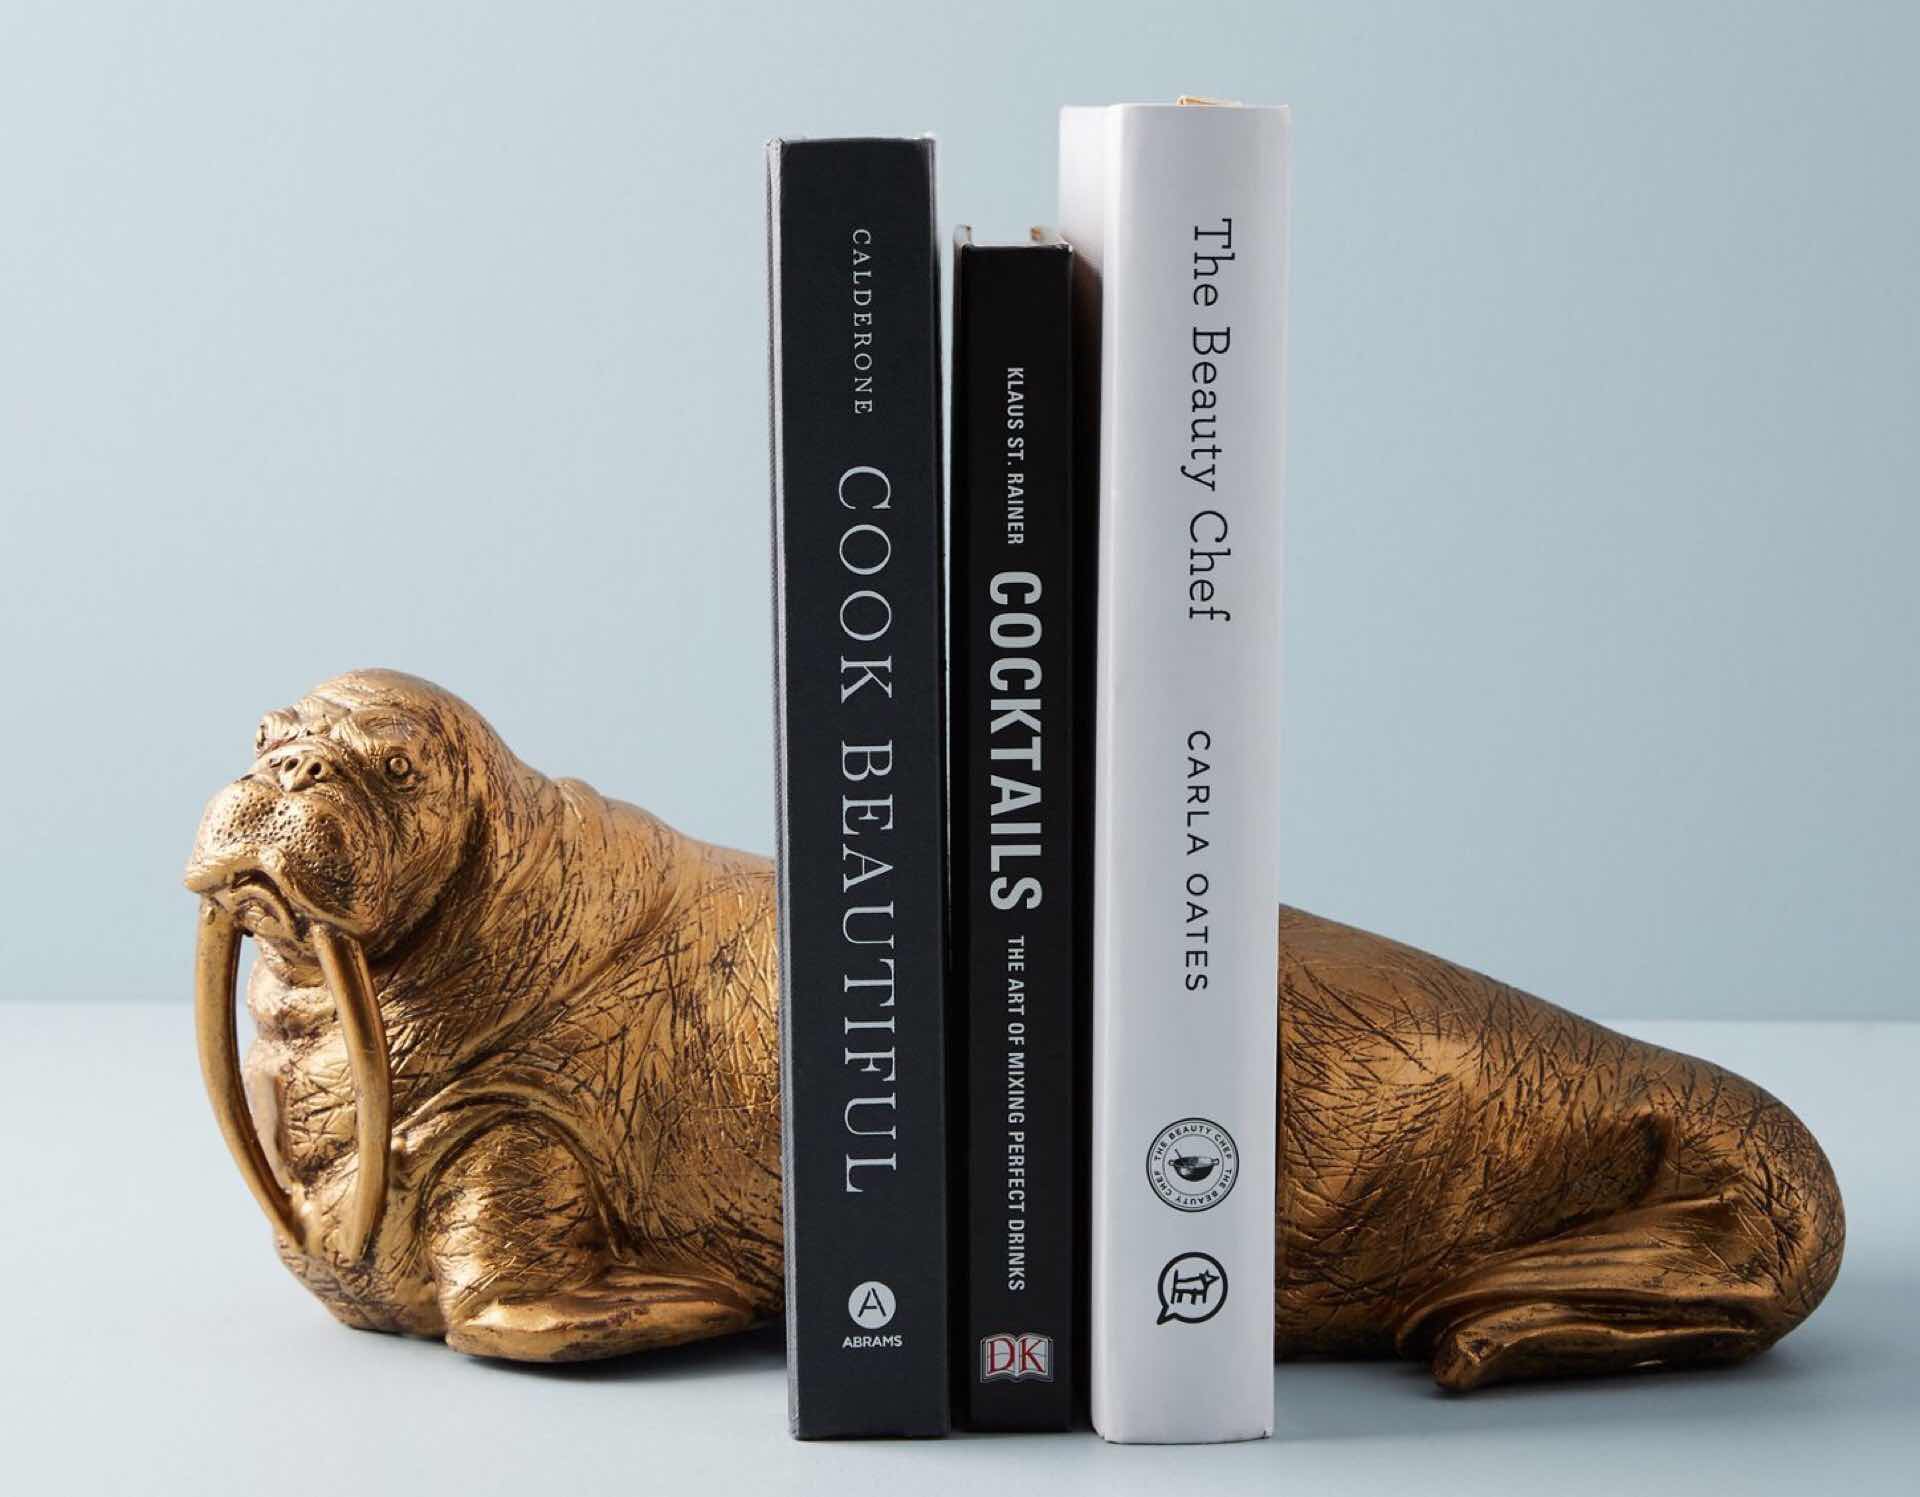 Who wouldn't want a friendly walrus pal to hold their books up? ($48)